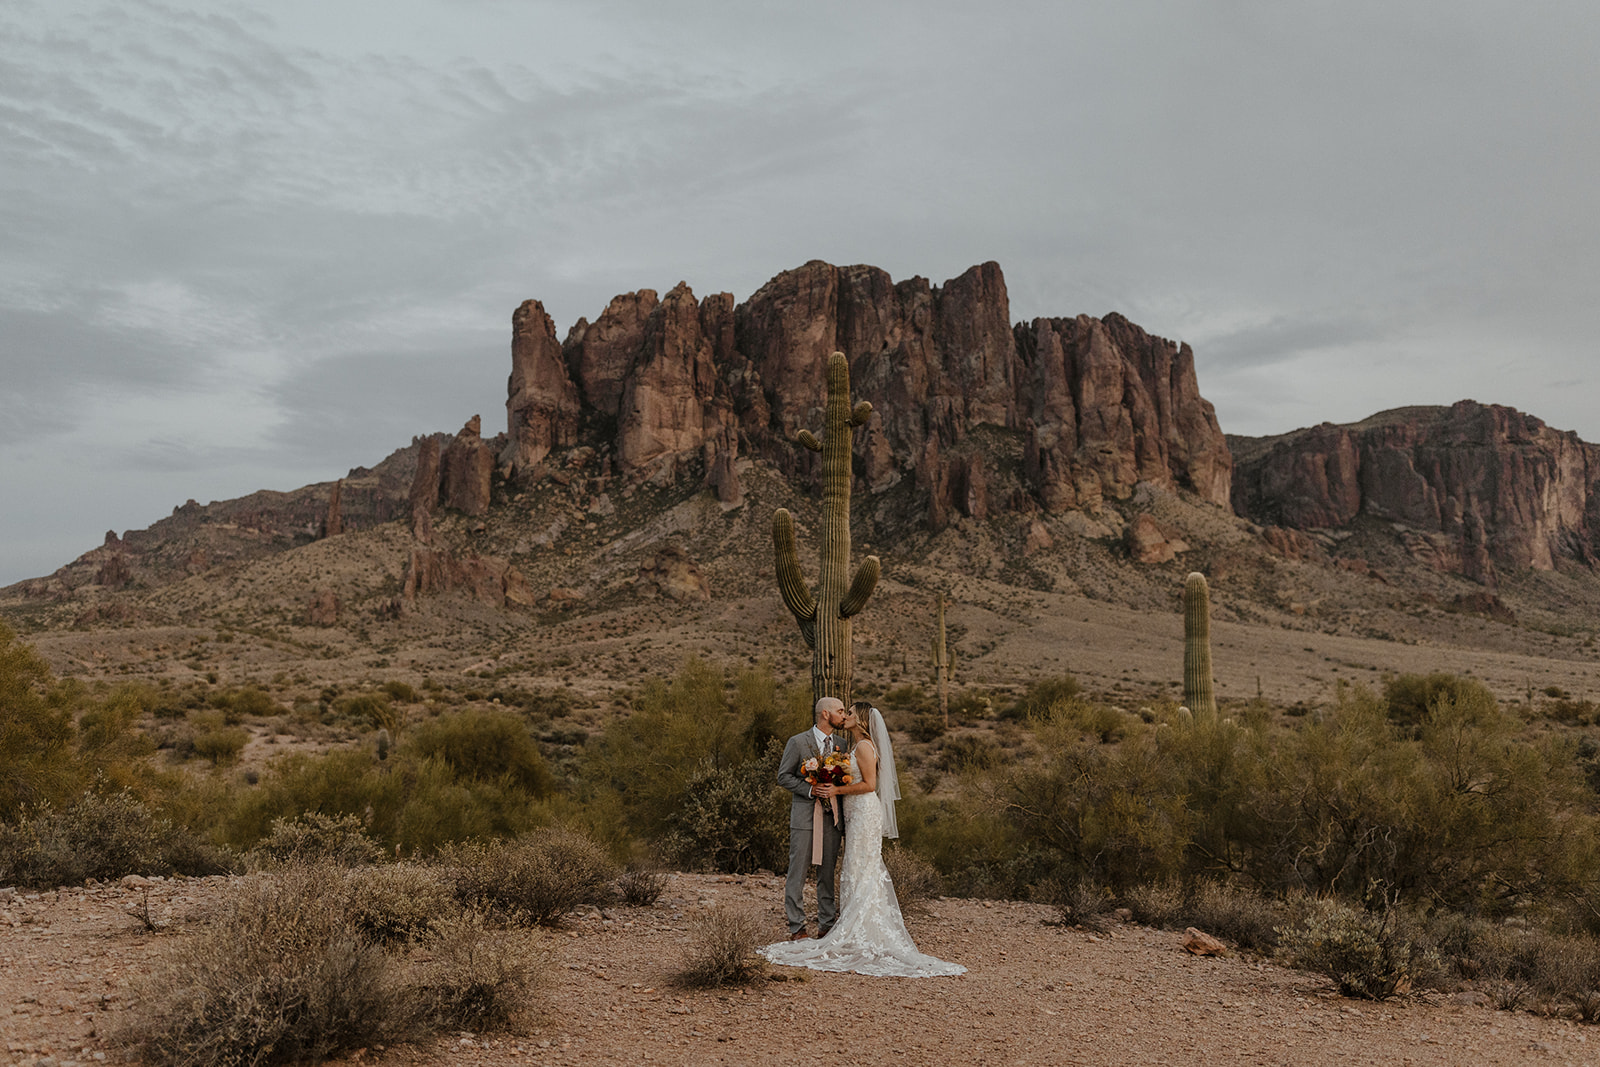 bride and groom pose in the stunning lost dutchman state park after their desert wedding day